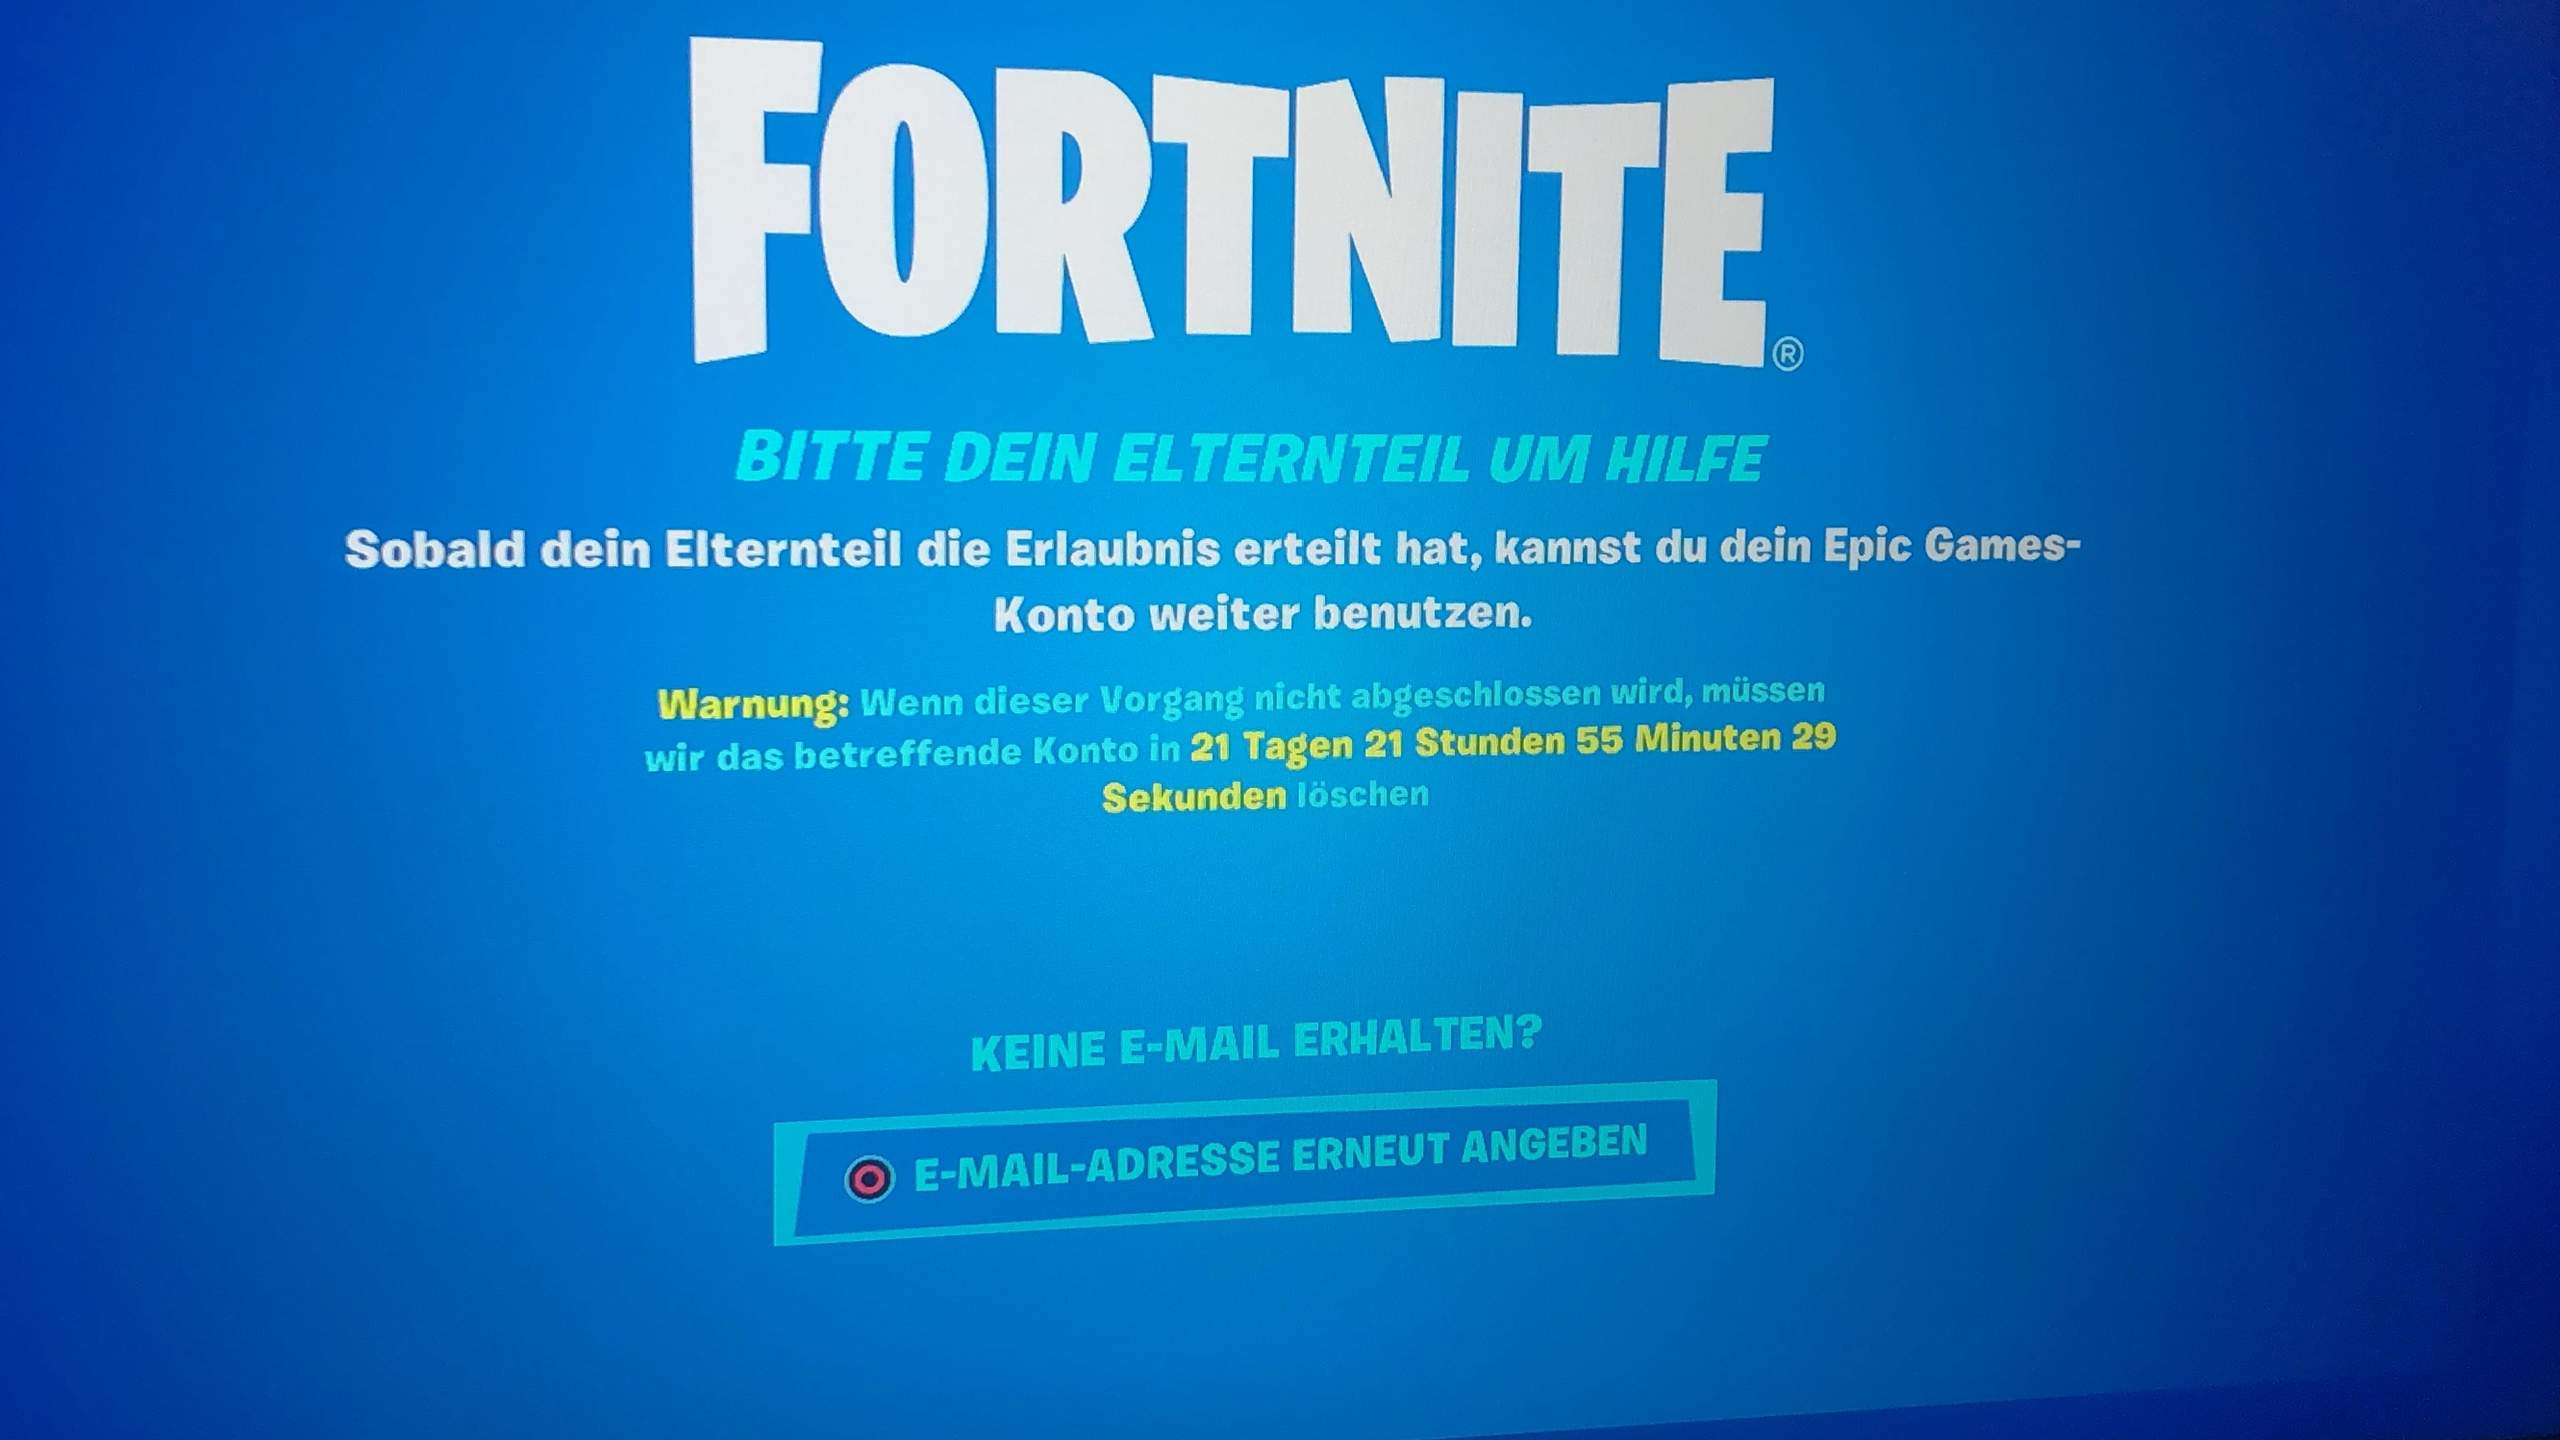 hun er robot fejre epic games Account wird in 30 Tagen gelöscht? (Spiele und Gaming, Fortnite,  Fall Guys Ultimate Knockout)